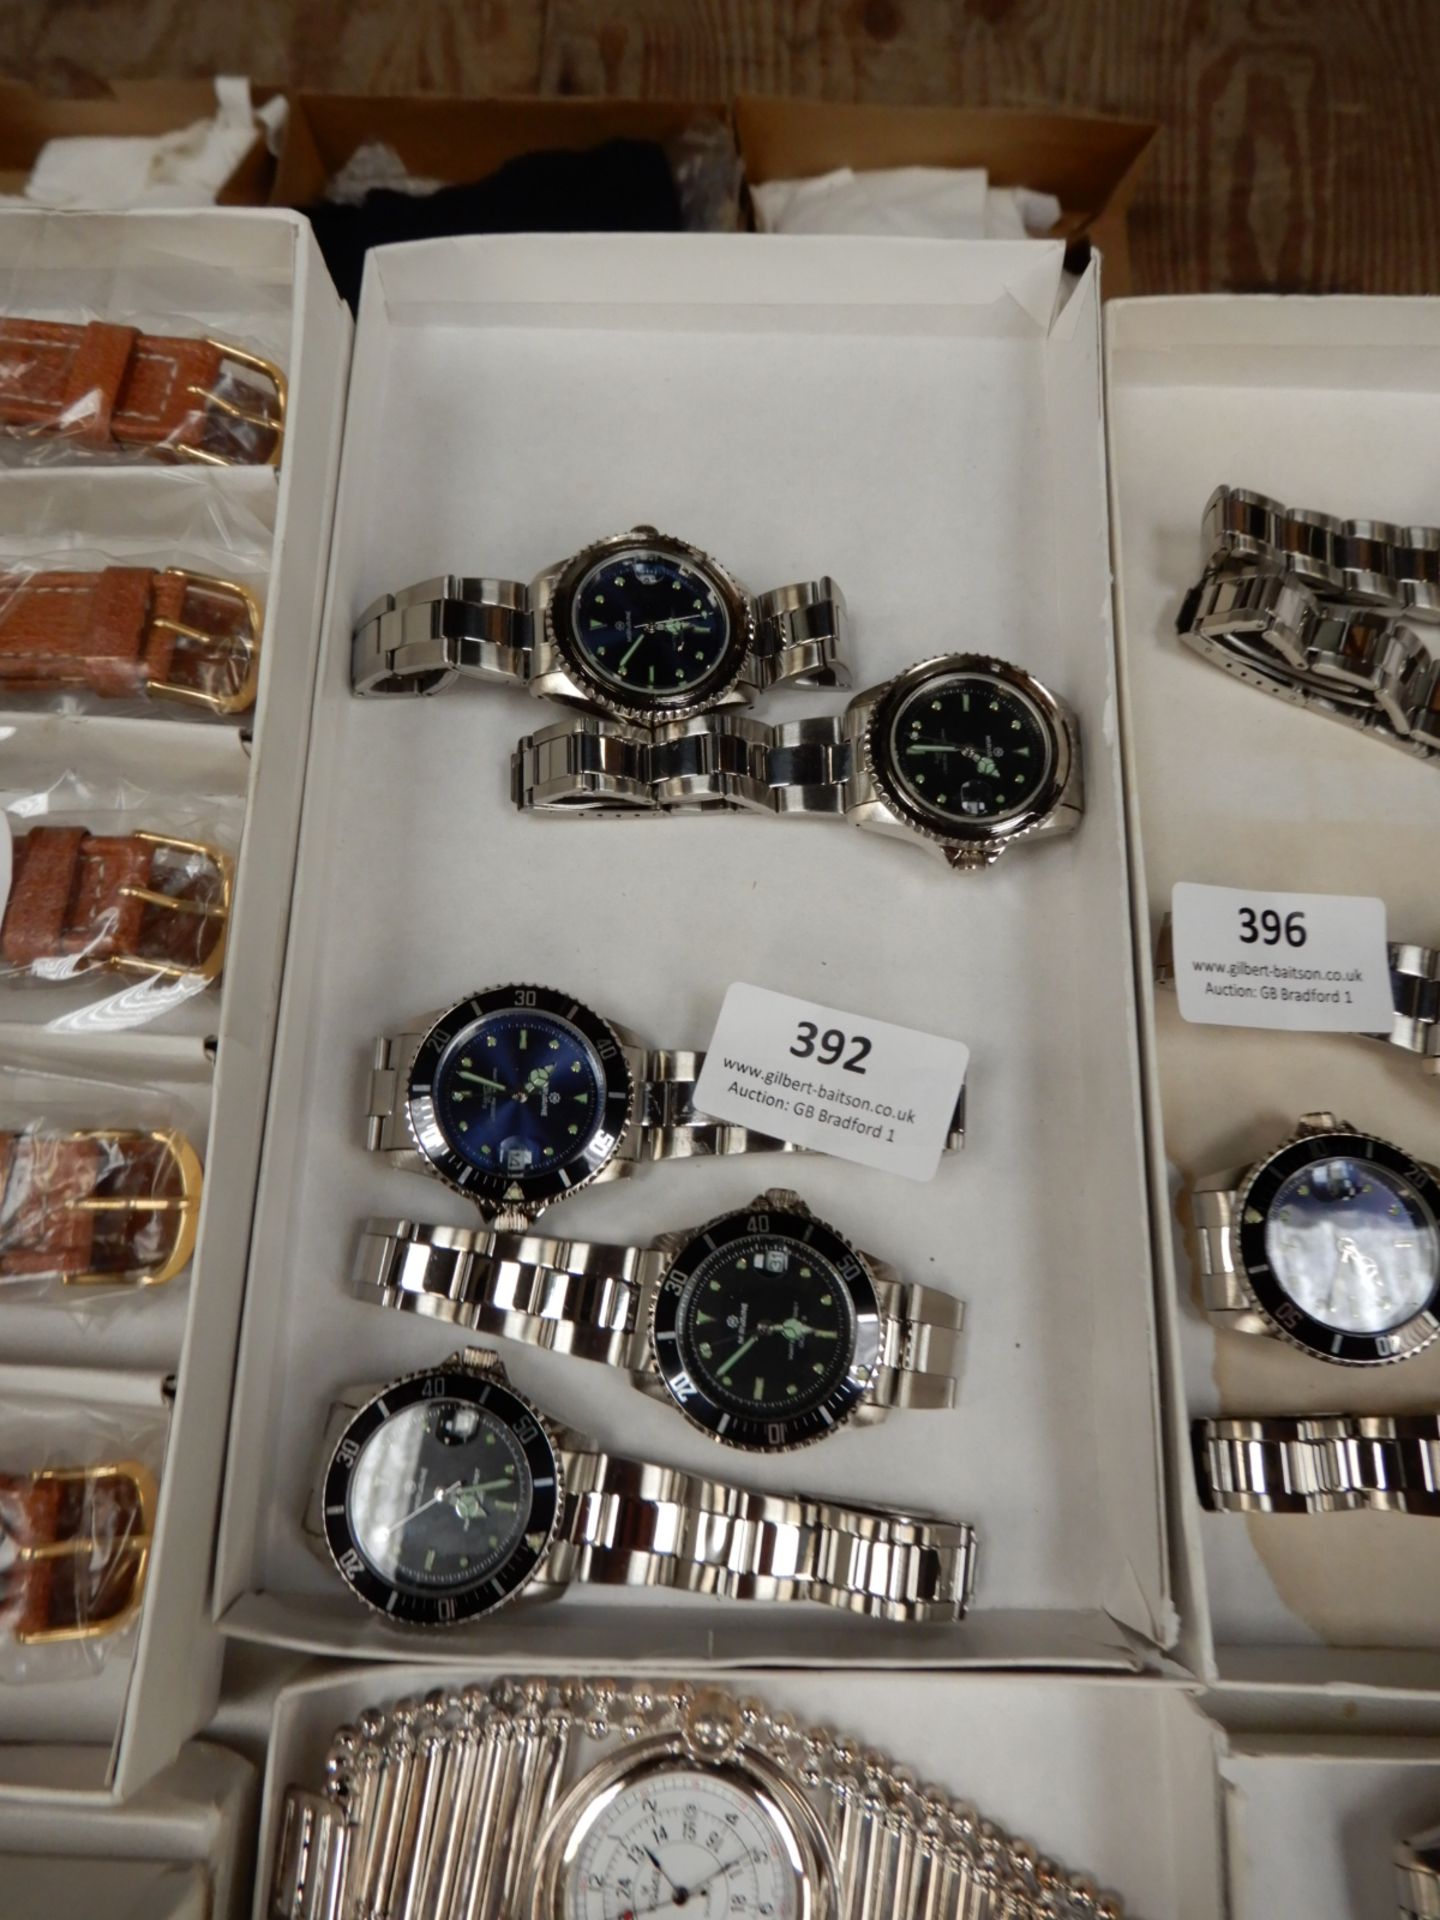 Box Containing 5 Gents Watches with Stainless Stee